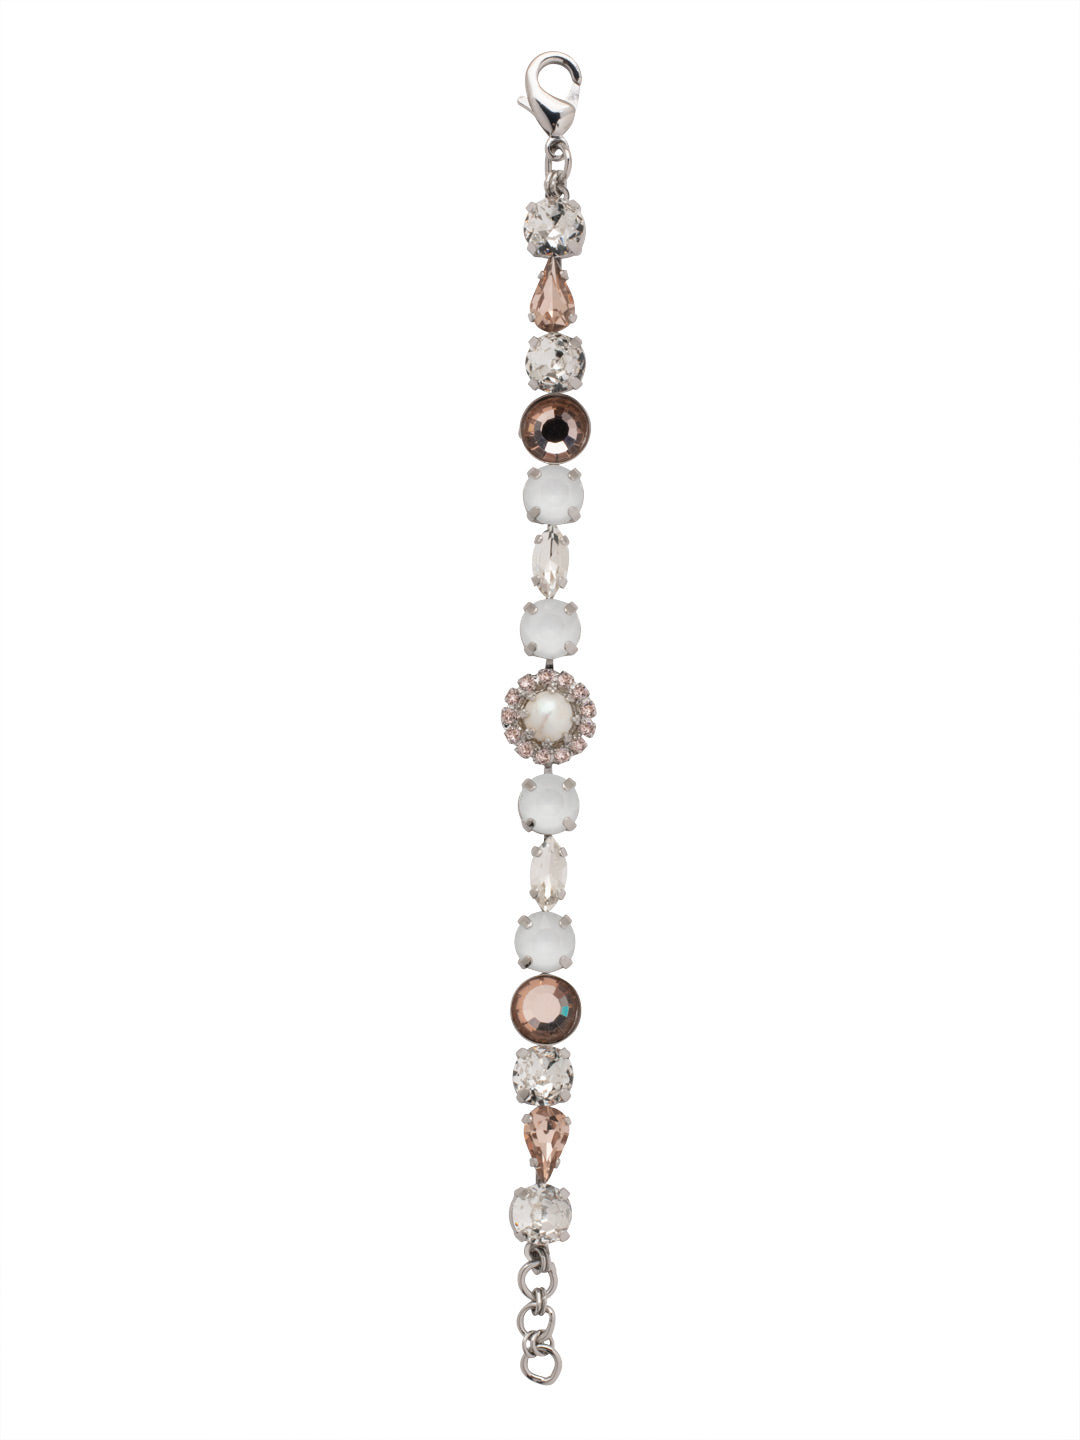 Shoshanna Classic Tennis Bracelet - BFC32PDSNB - <p>The Shoshanna Classic Tennis Bracelet features a variety of crystals and a halo freshwater pearl on an adjustable chain, secured with a lobster claw clasp. From Sorrelli's Snow Bunny collection in our Palladium finish.</p>